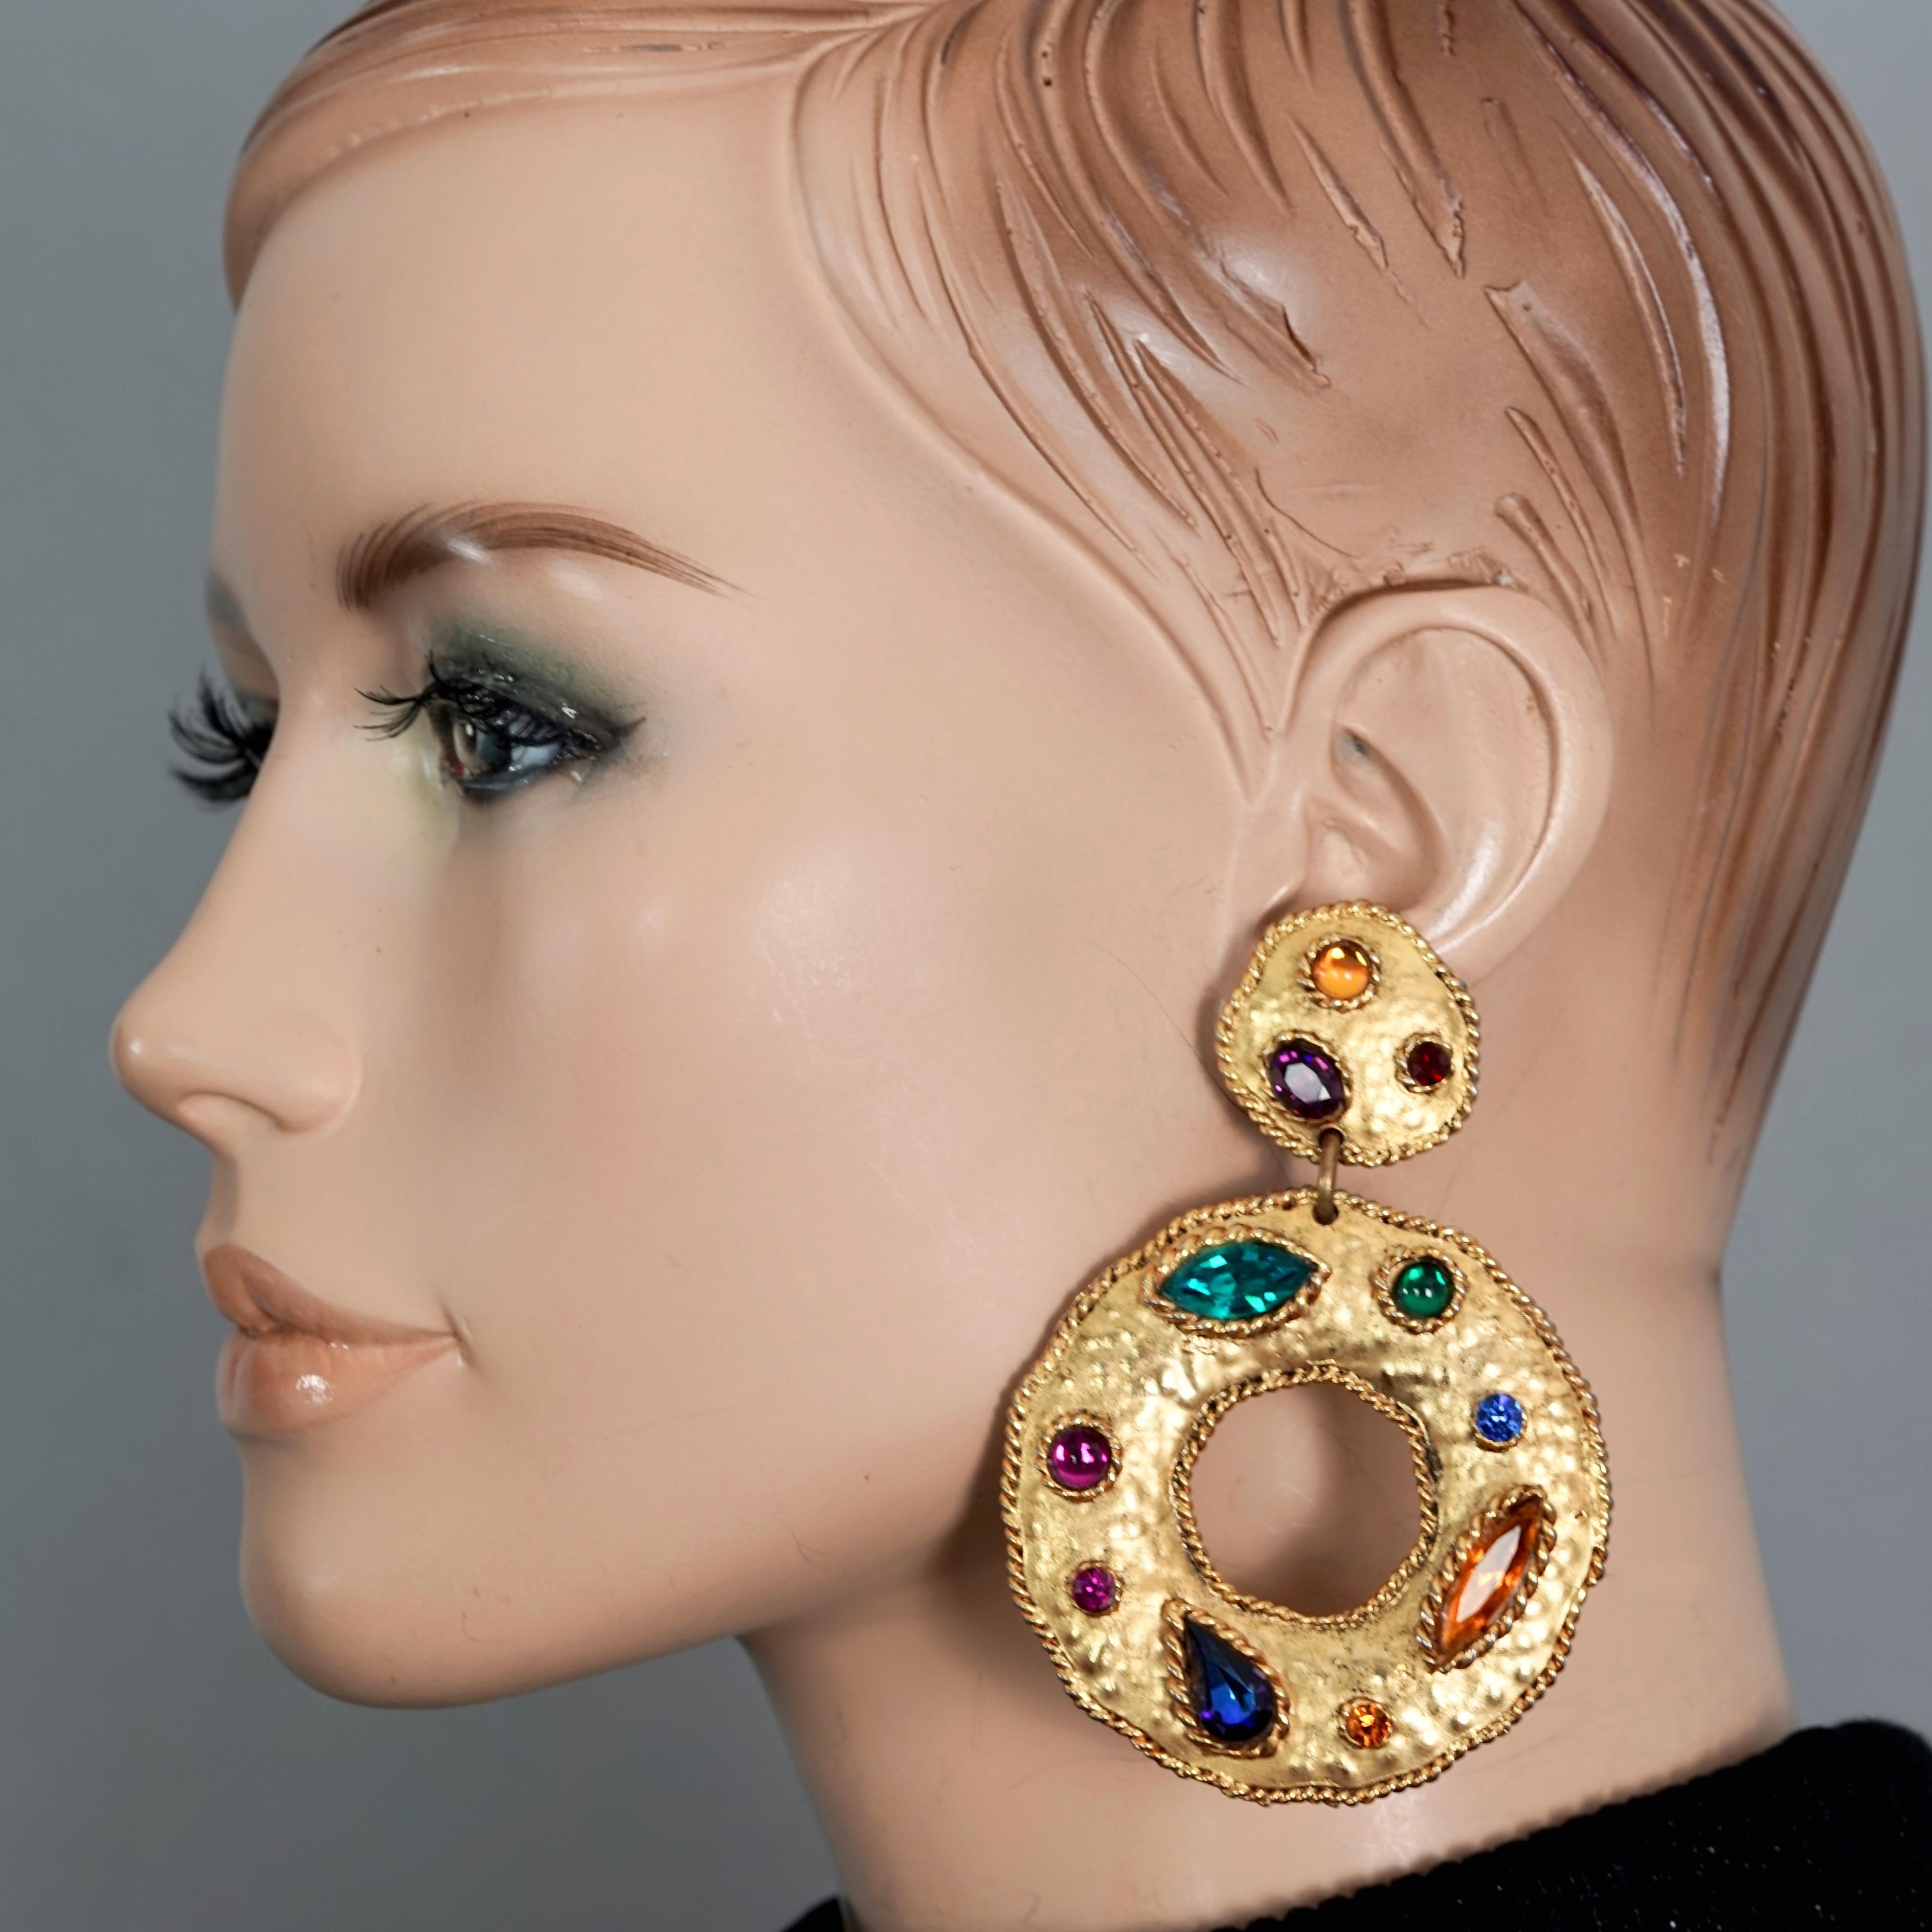 Vintage Massive EDOUARD RAMBAUD Jewelled Hoop Dangling Earrings

Measurements:
Height: 3.54 inches (9 cm)
Width: 2.36 inches (6 cm)
Weight per Earring: 32 grams

Features:
- 100% Authentic EDOUARD RAMBAUD.
- Massive hammered hoop dangling